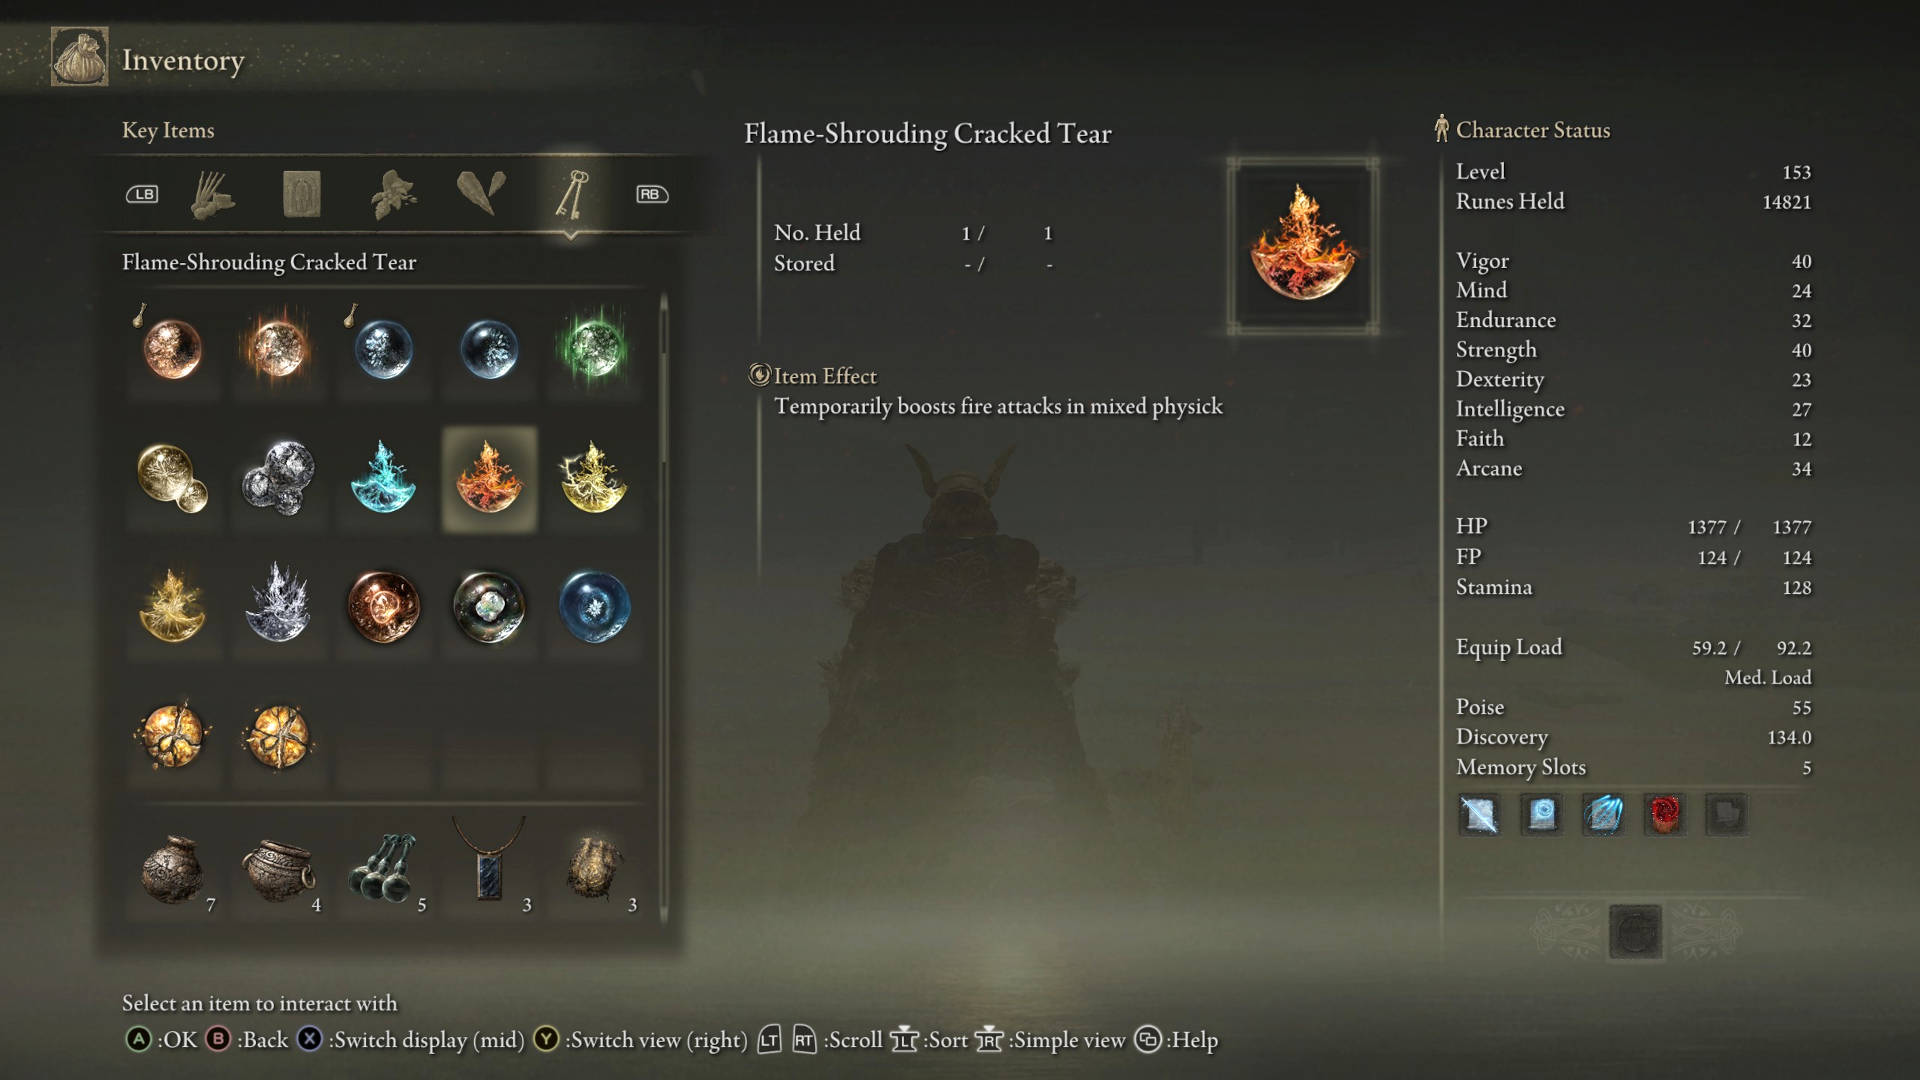 Elden Ring crystal tears: the Flame-shrouding Cracked tear in the inventory menu.